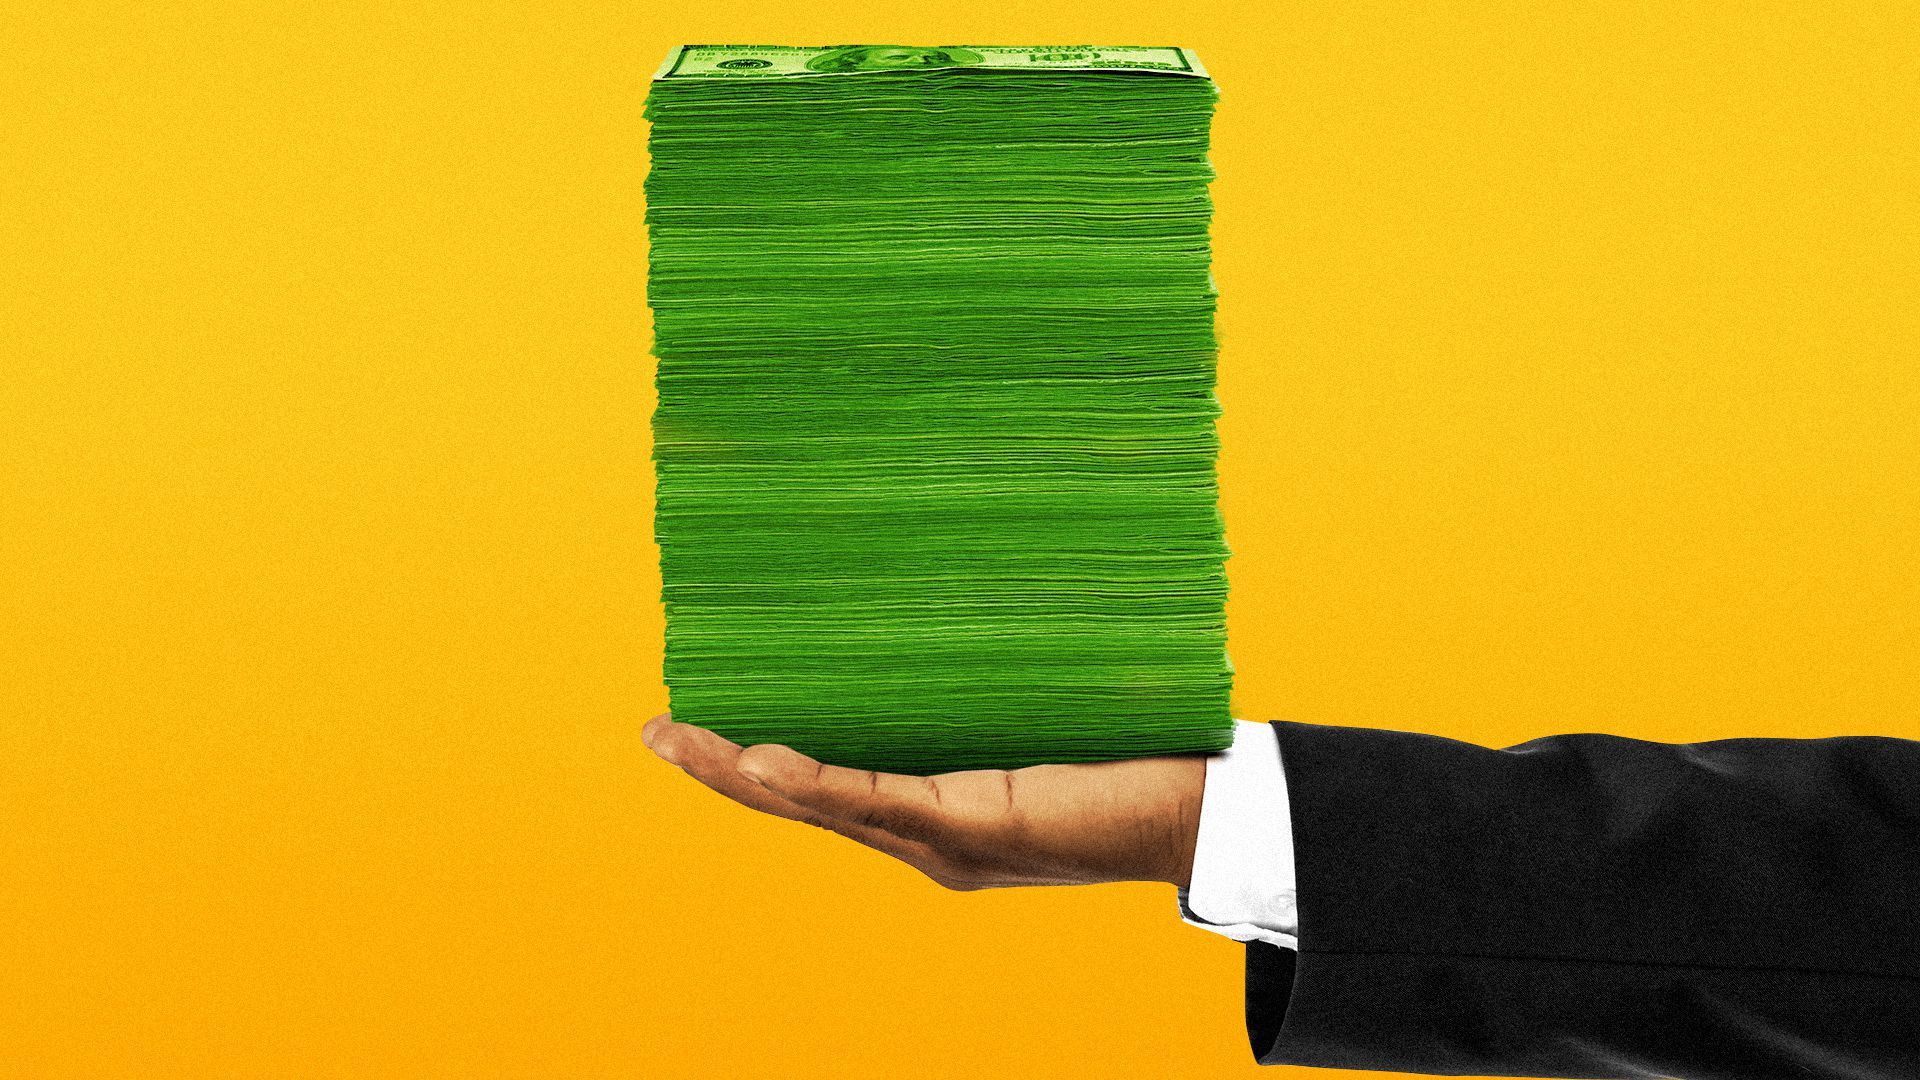 Illustration of a hand holding a very large stack of money.